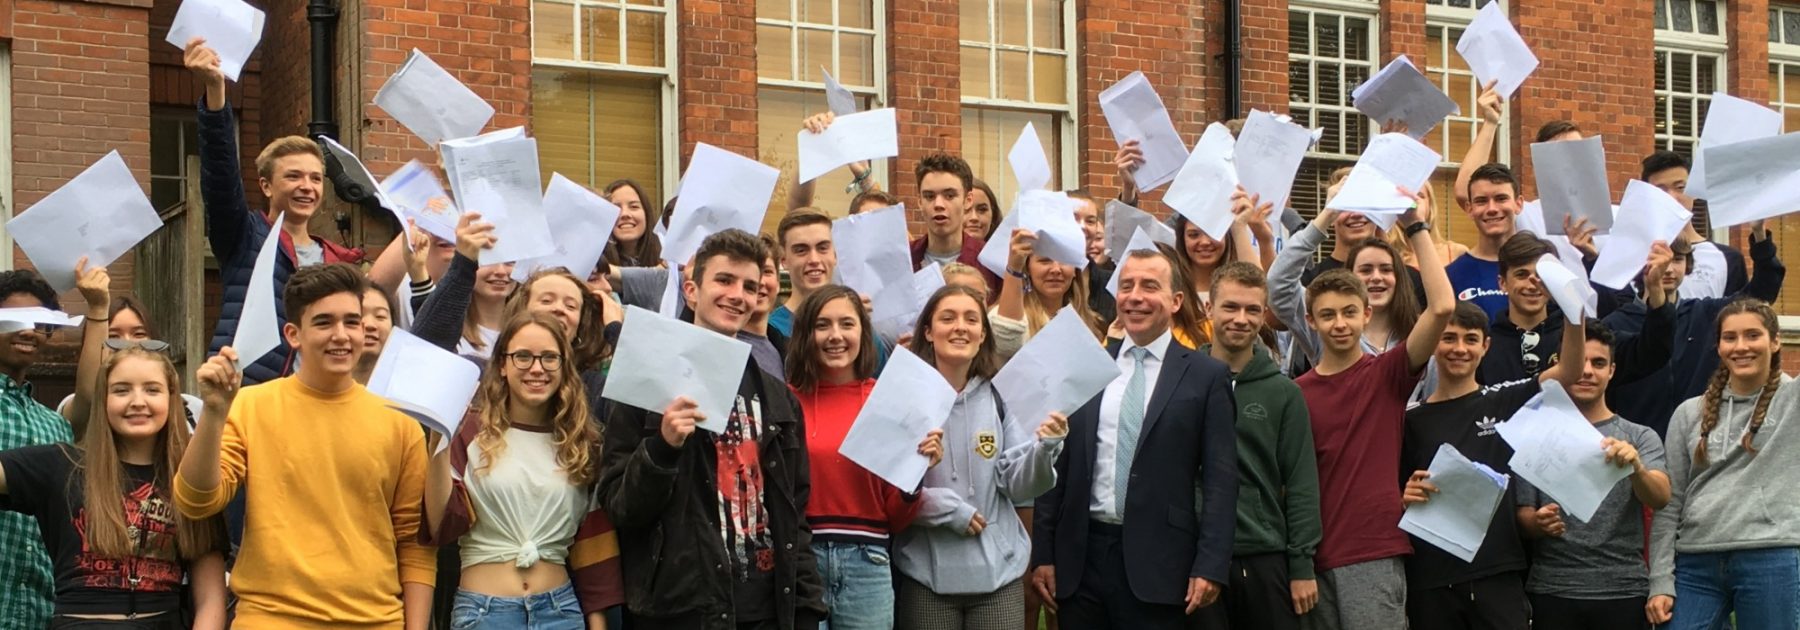 CATERHAM CELEBRATES OUTSTANDING GCSE RESULTS